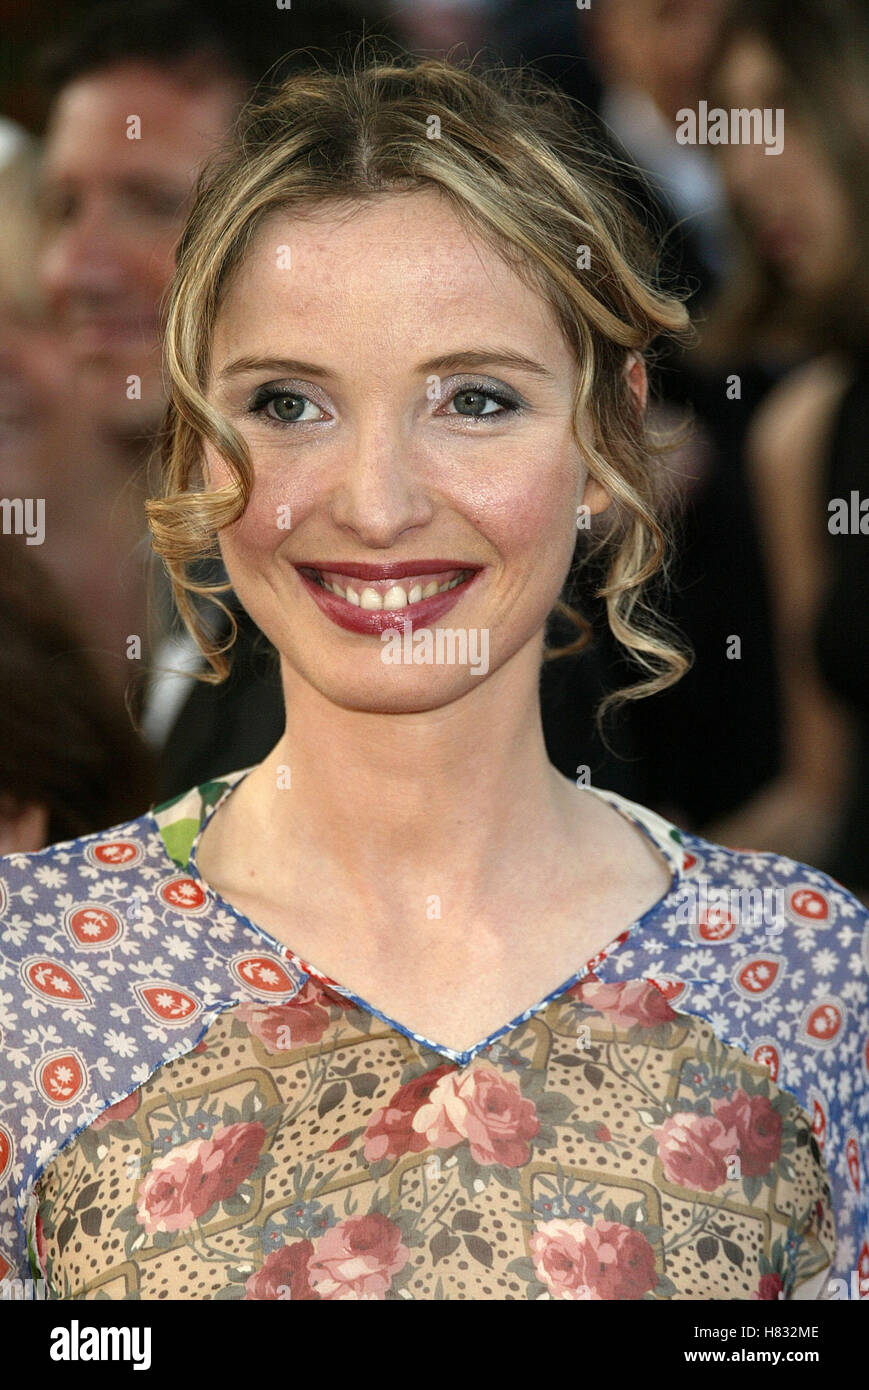 JULIE DELPY CANNES FILM FESTIVAL 2002 CANNES FILM FESTIVAL CANNES FRANCE 17 May 2002 Stock Photo